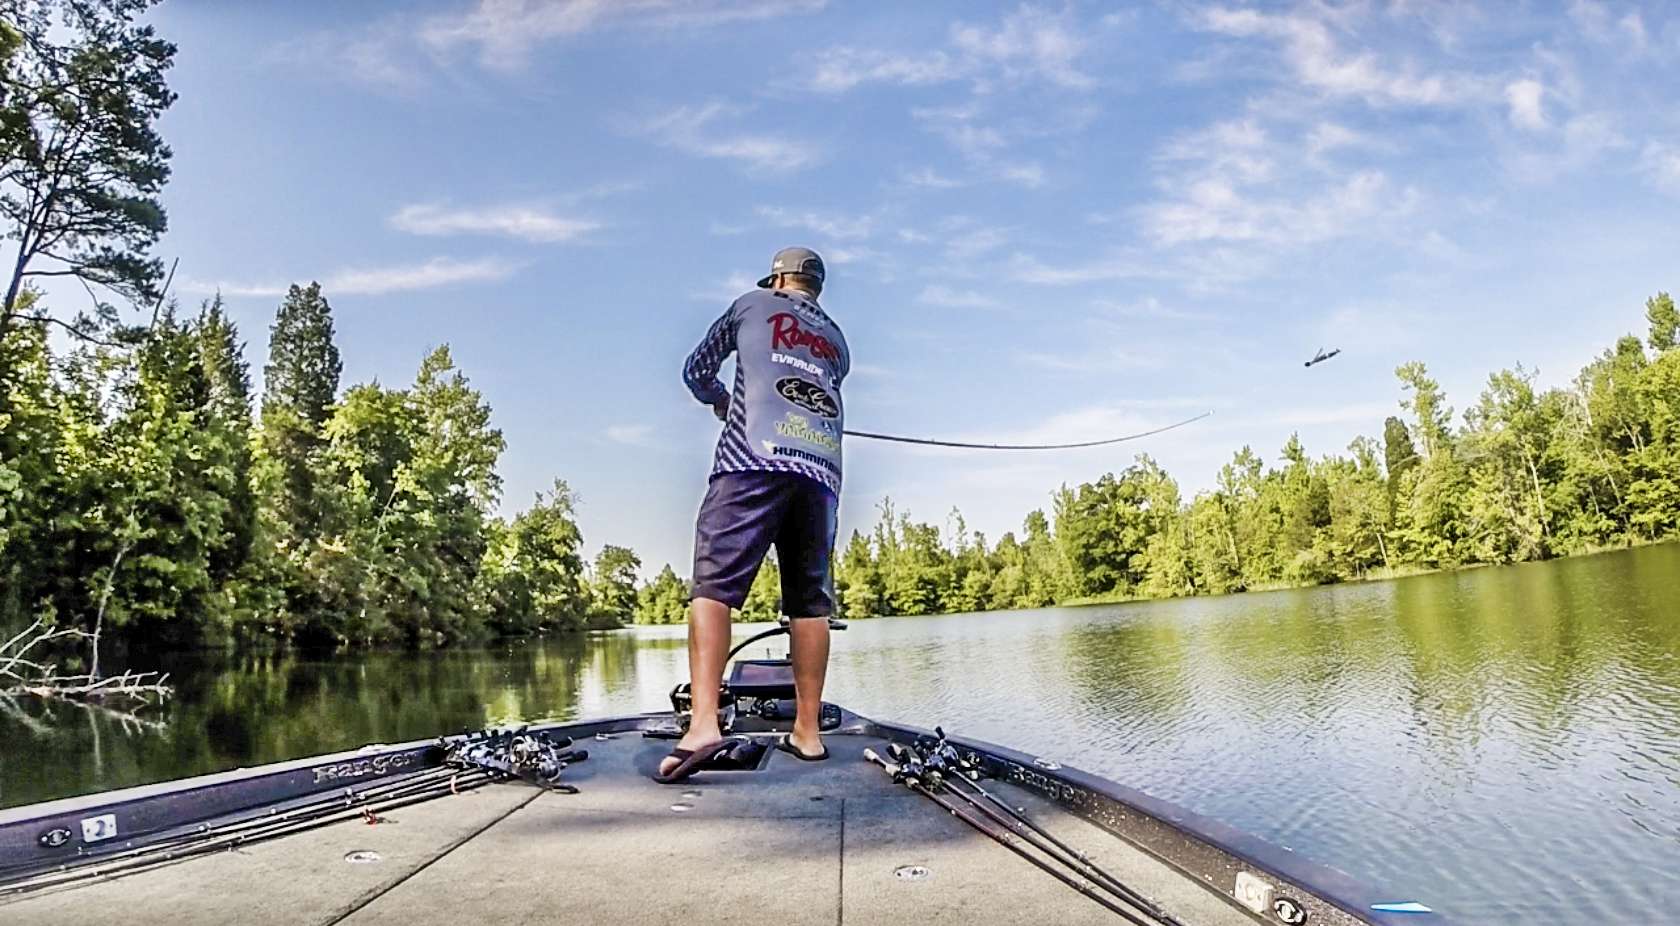 Brett Hite has made the bulk of his career earnings perfecting the bait that hangs in the air here, his ChatterBait.